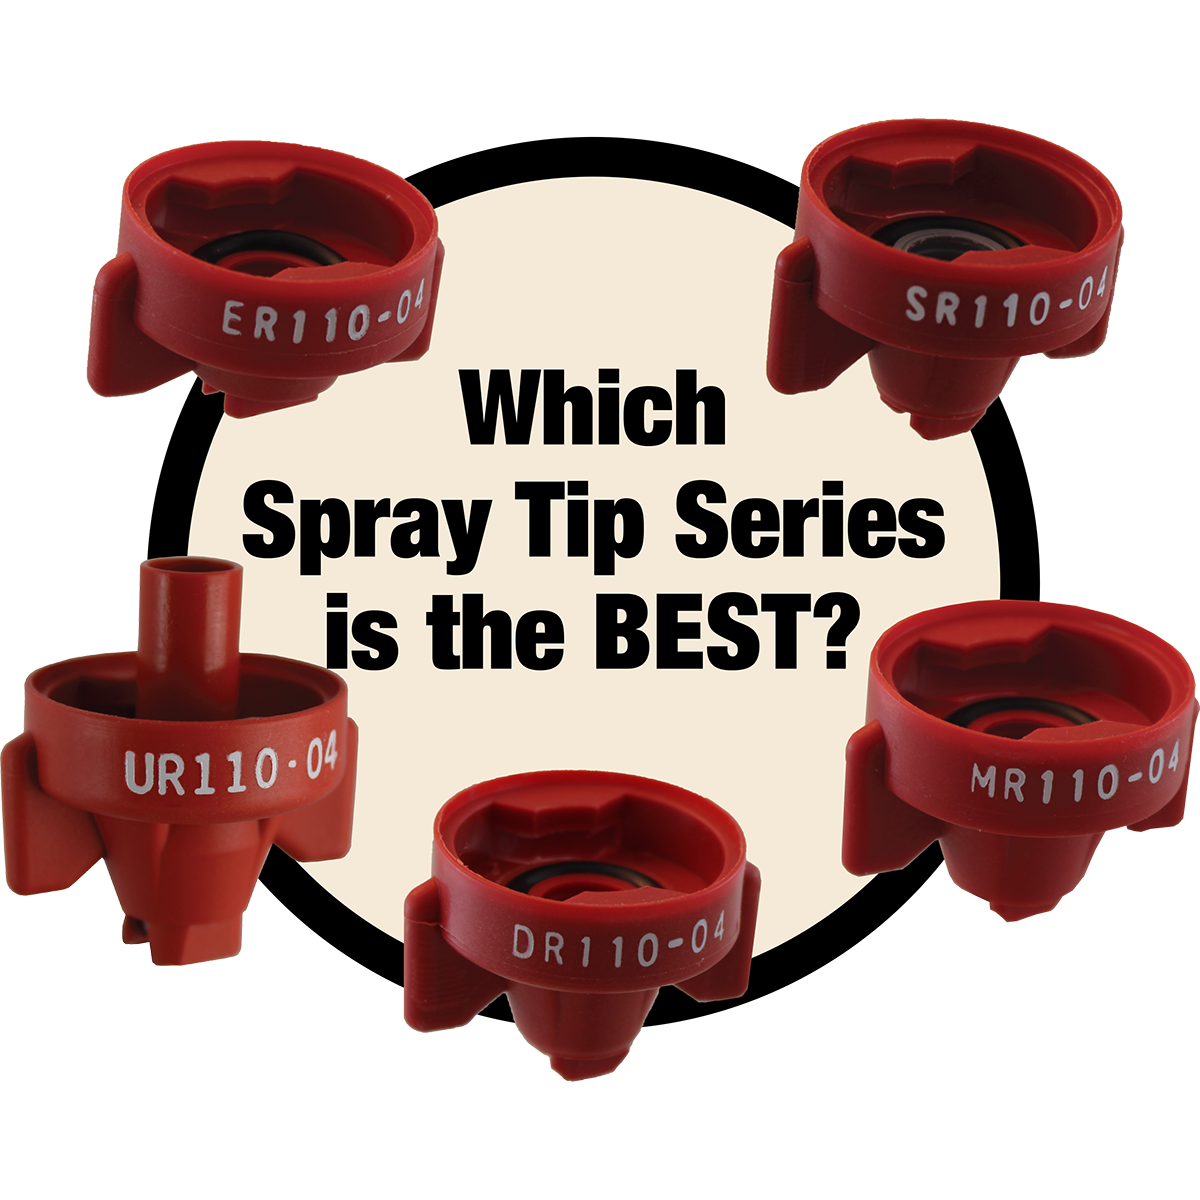 Since each application is different, it is best to find the spray tip that suits your speed, coverage and drift control requirements, instead of picking a tip based on the series alone. Tip Wizard is the recommended tool to make picking spray tips easy.